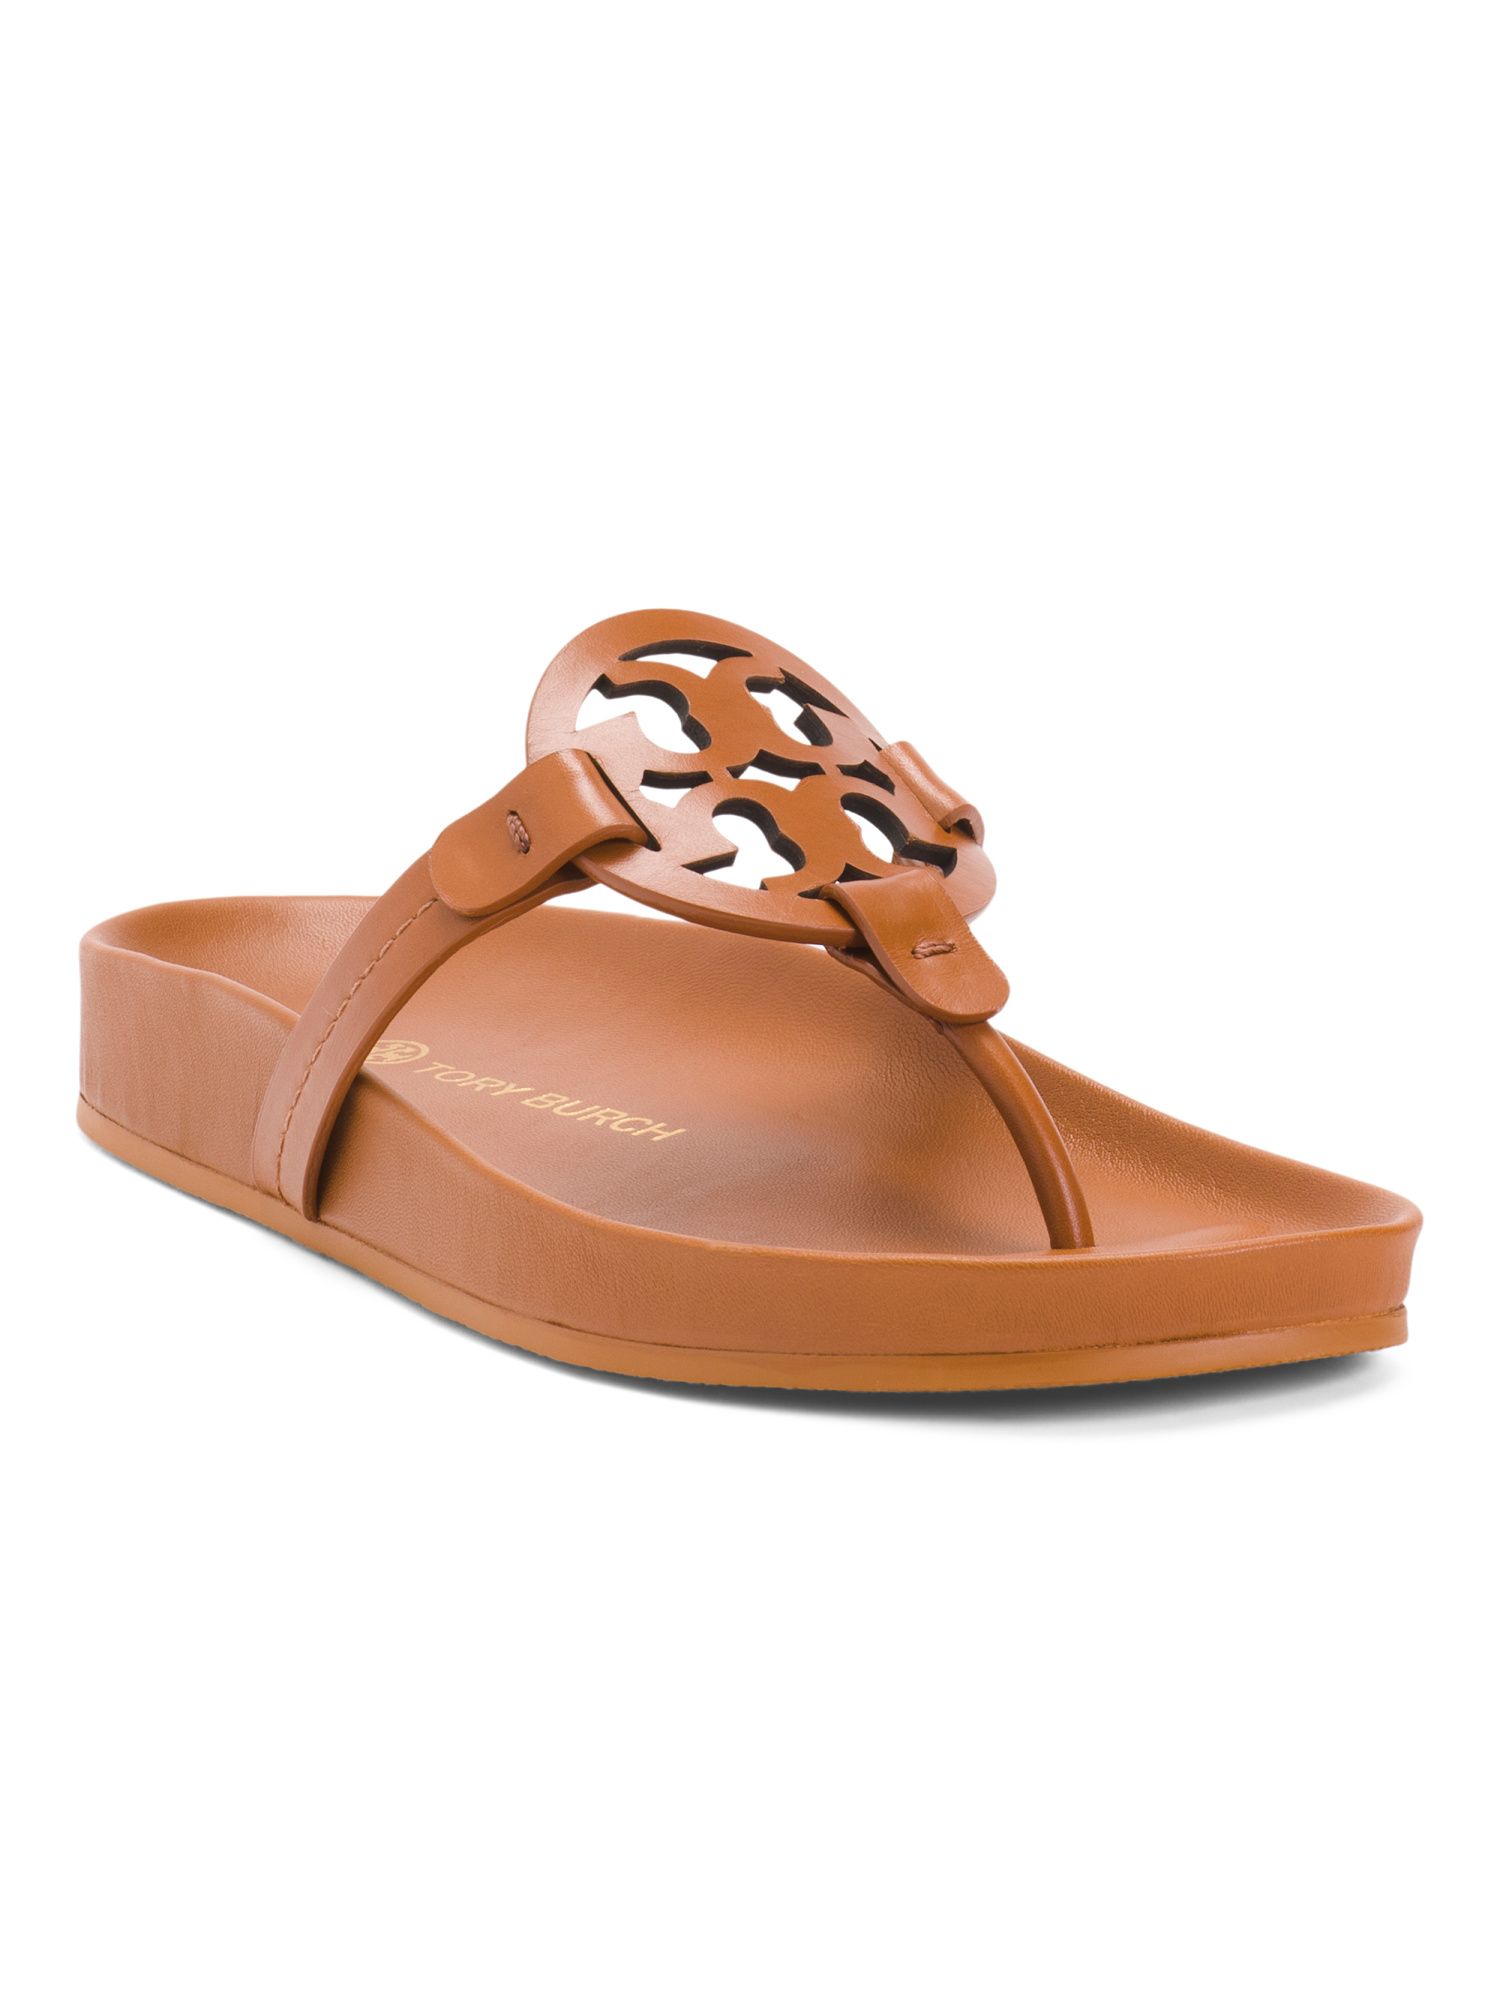 Made In Brazil Leather Footbed Flip Flop Sandals | Women's Shoes | Marshalls | Marshalls